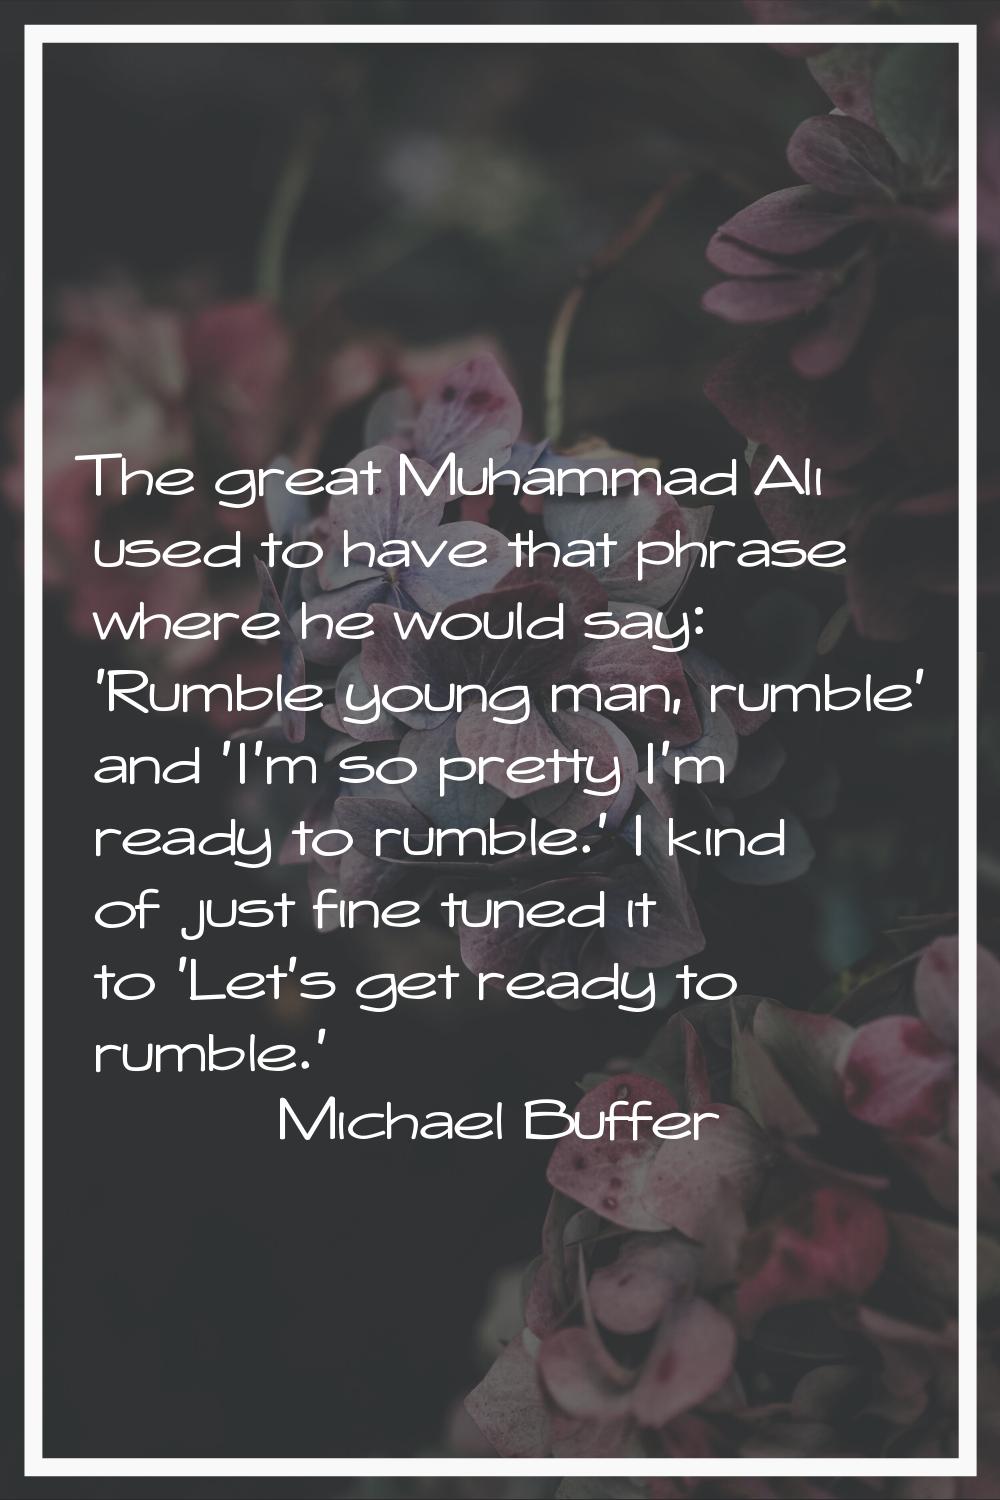 The great Muhammad Ali used to have that phrase where he would say: 'Rumble young man, rumble' and 